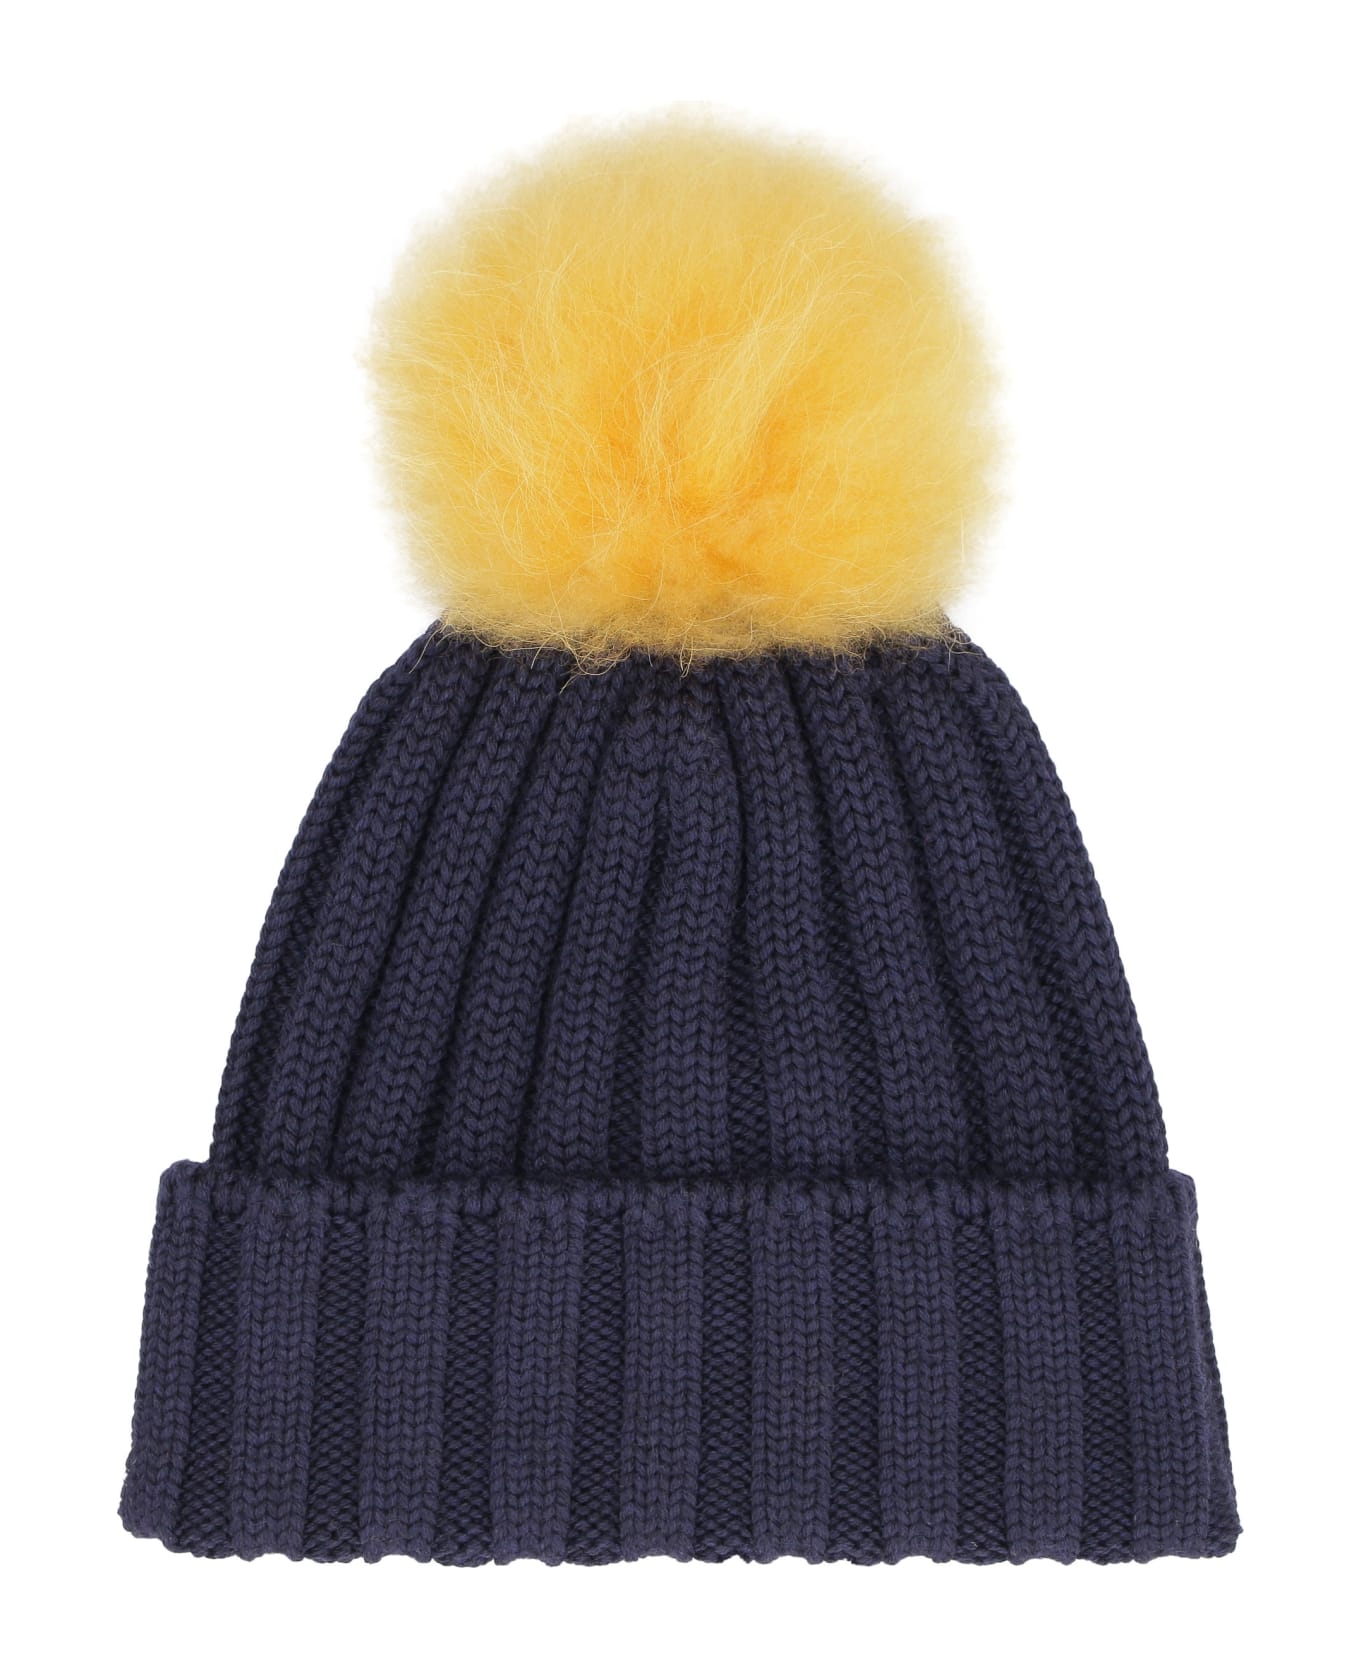 Woolrich Knitted Wool Hat With Pom-pom - blue 帽子